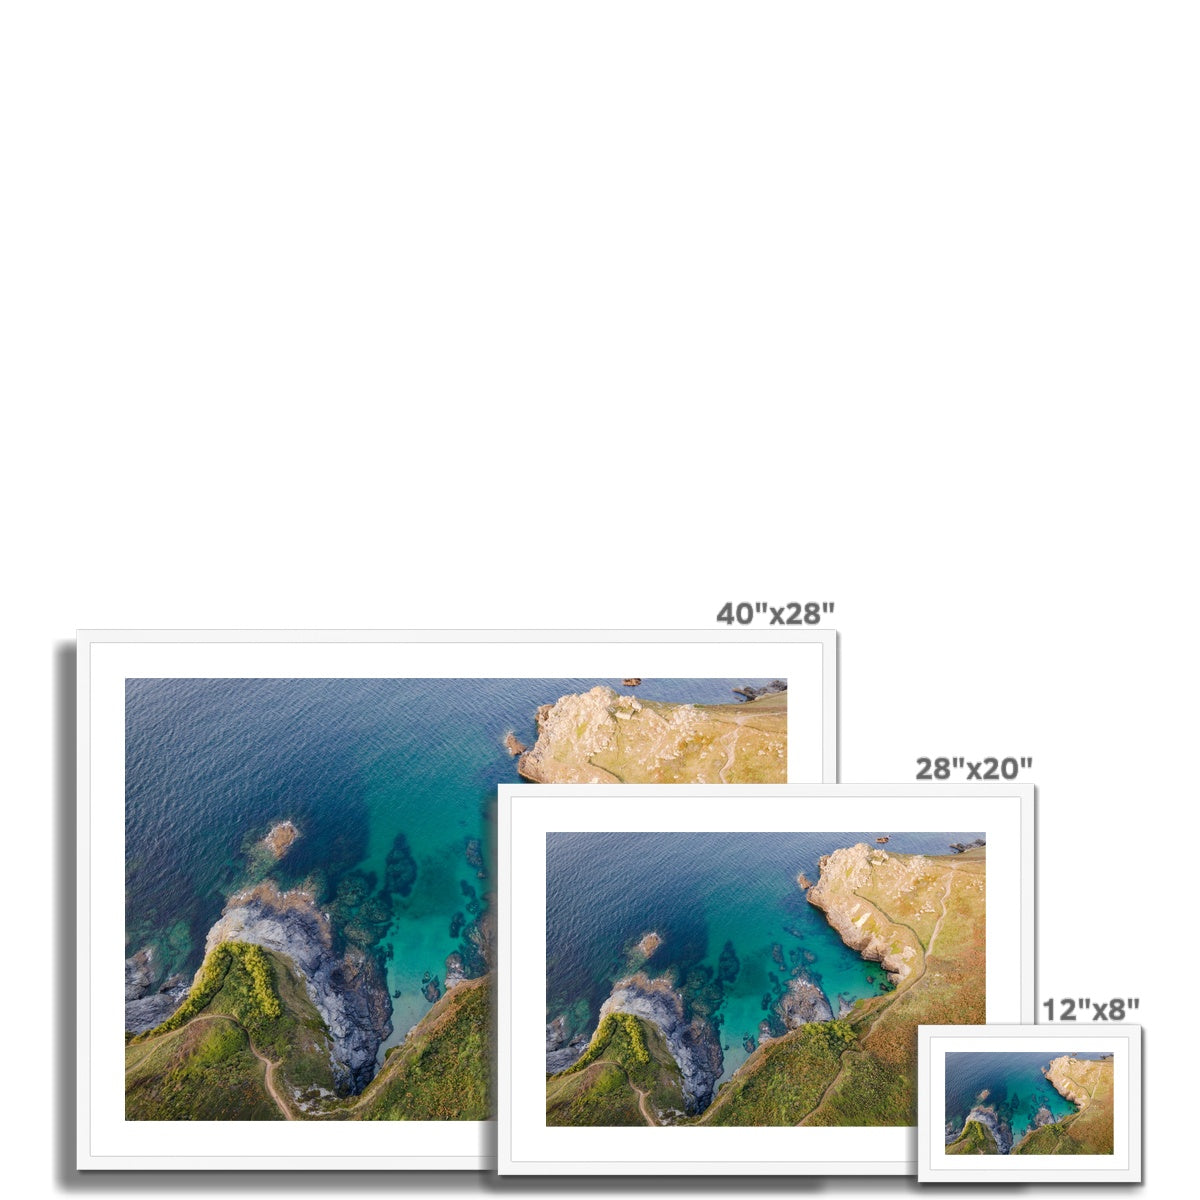 piskies cove wooden frame sizes